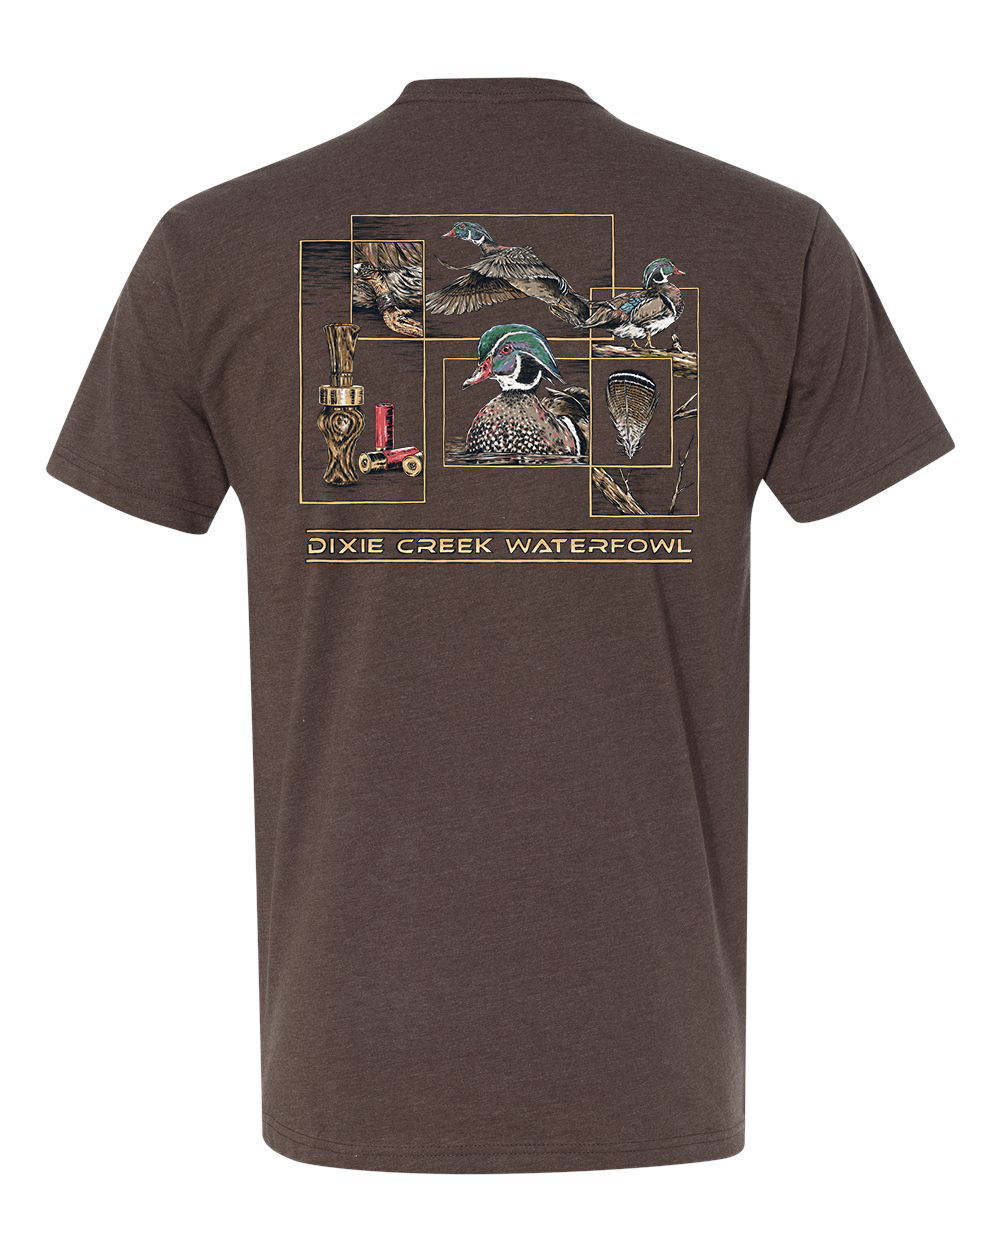 Wood Duck Collage - Next Level Tee